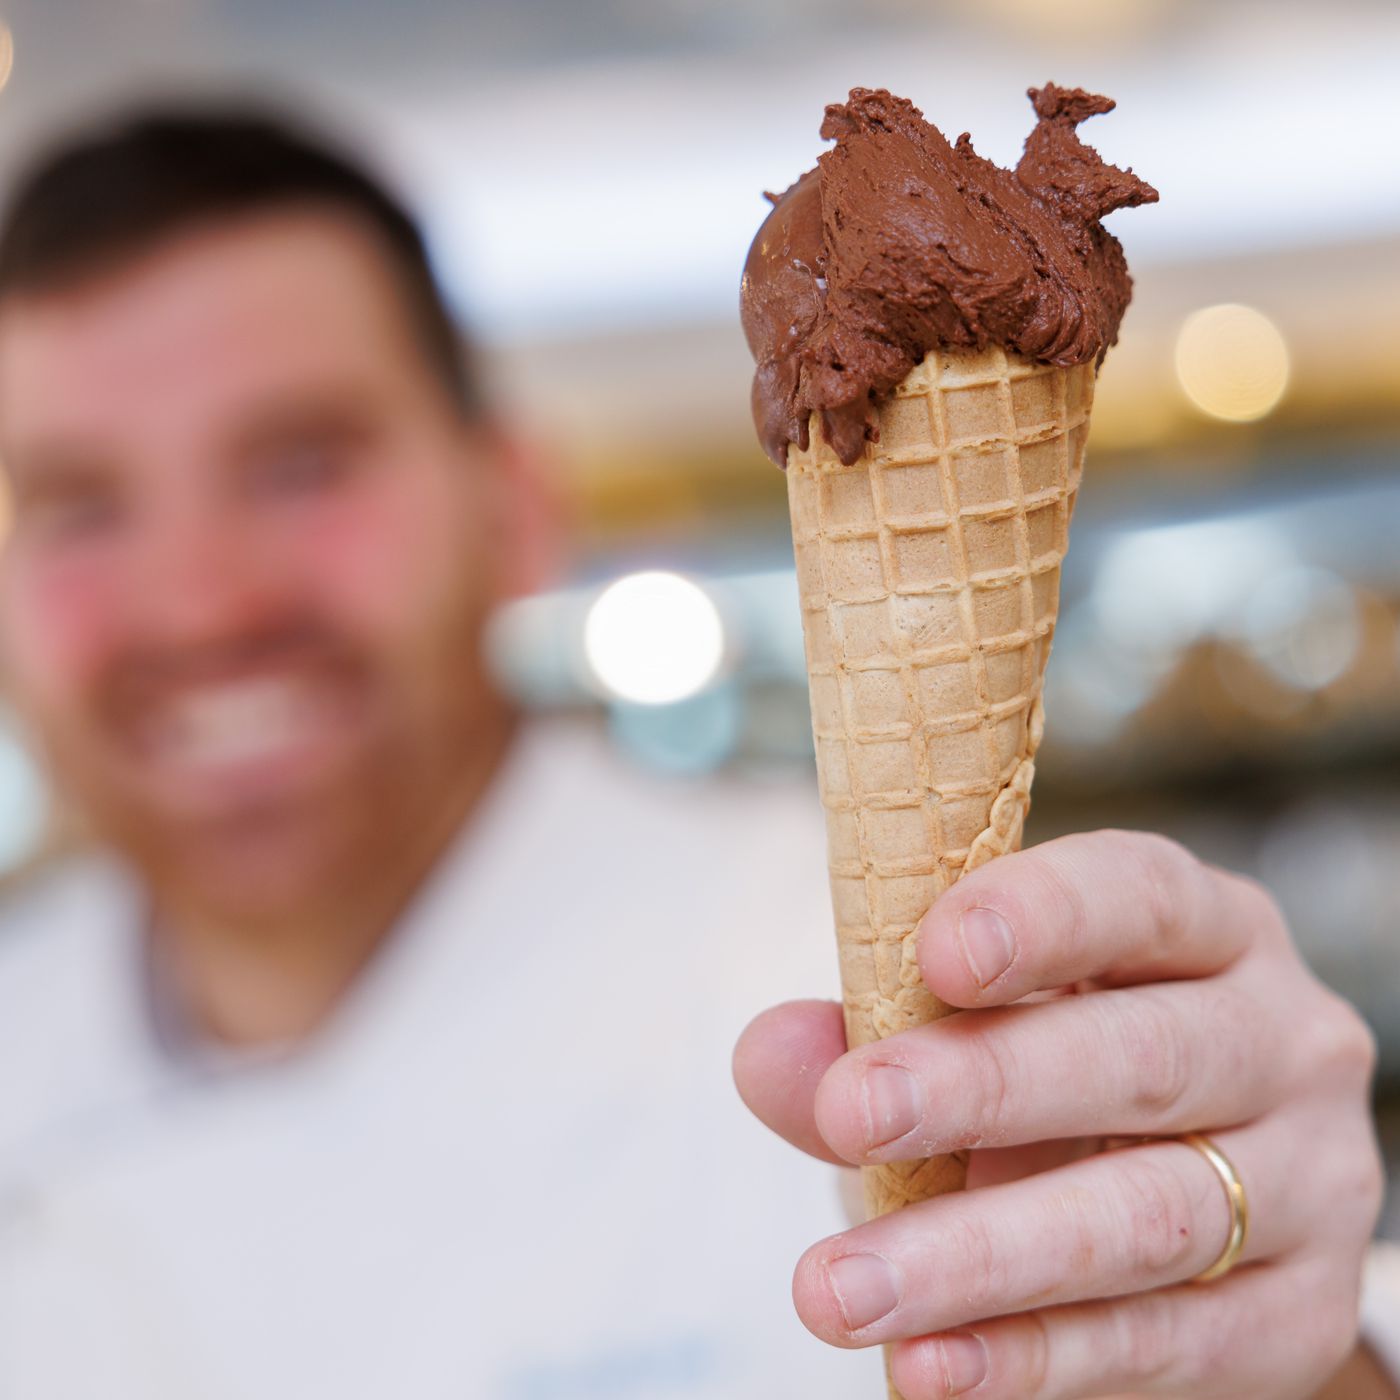 Does Ice Cream Make You Fat: Debunking Ice Cream Weight Gain Myths